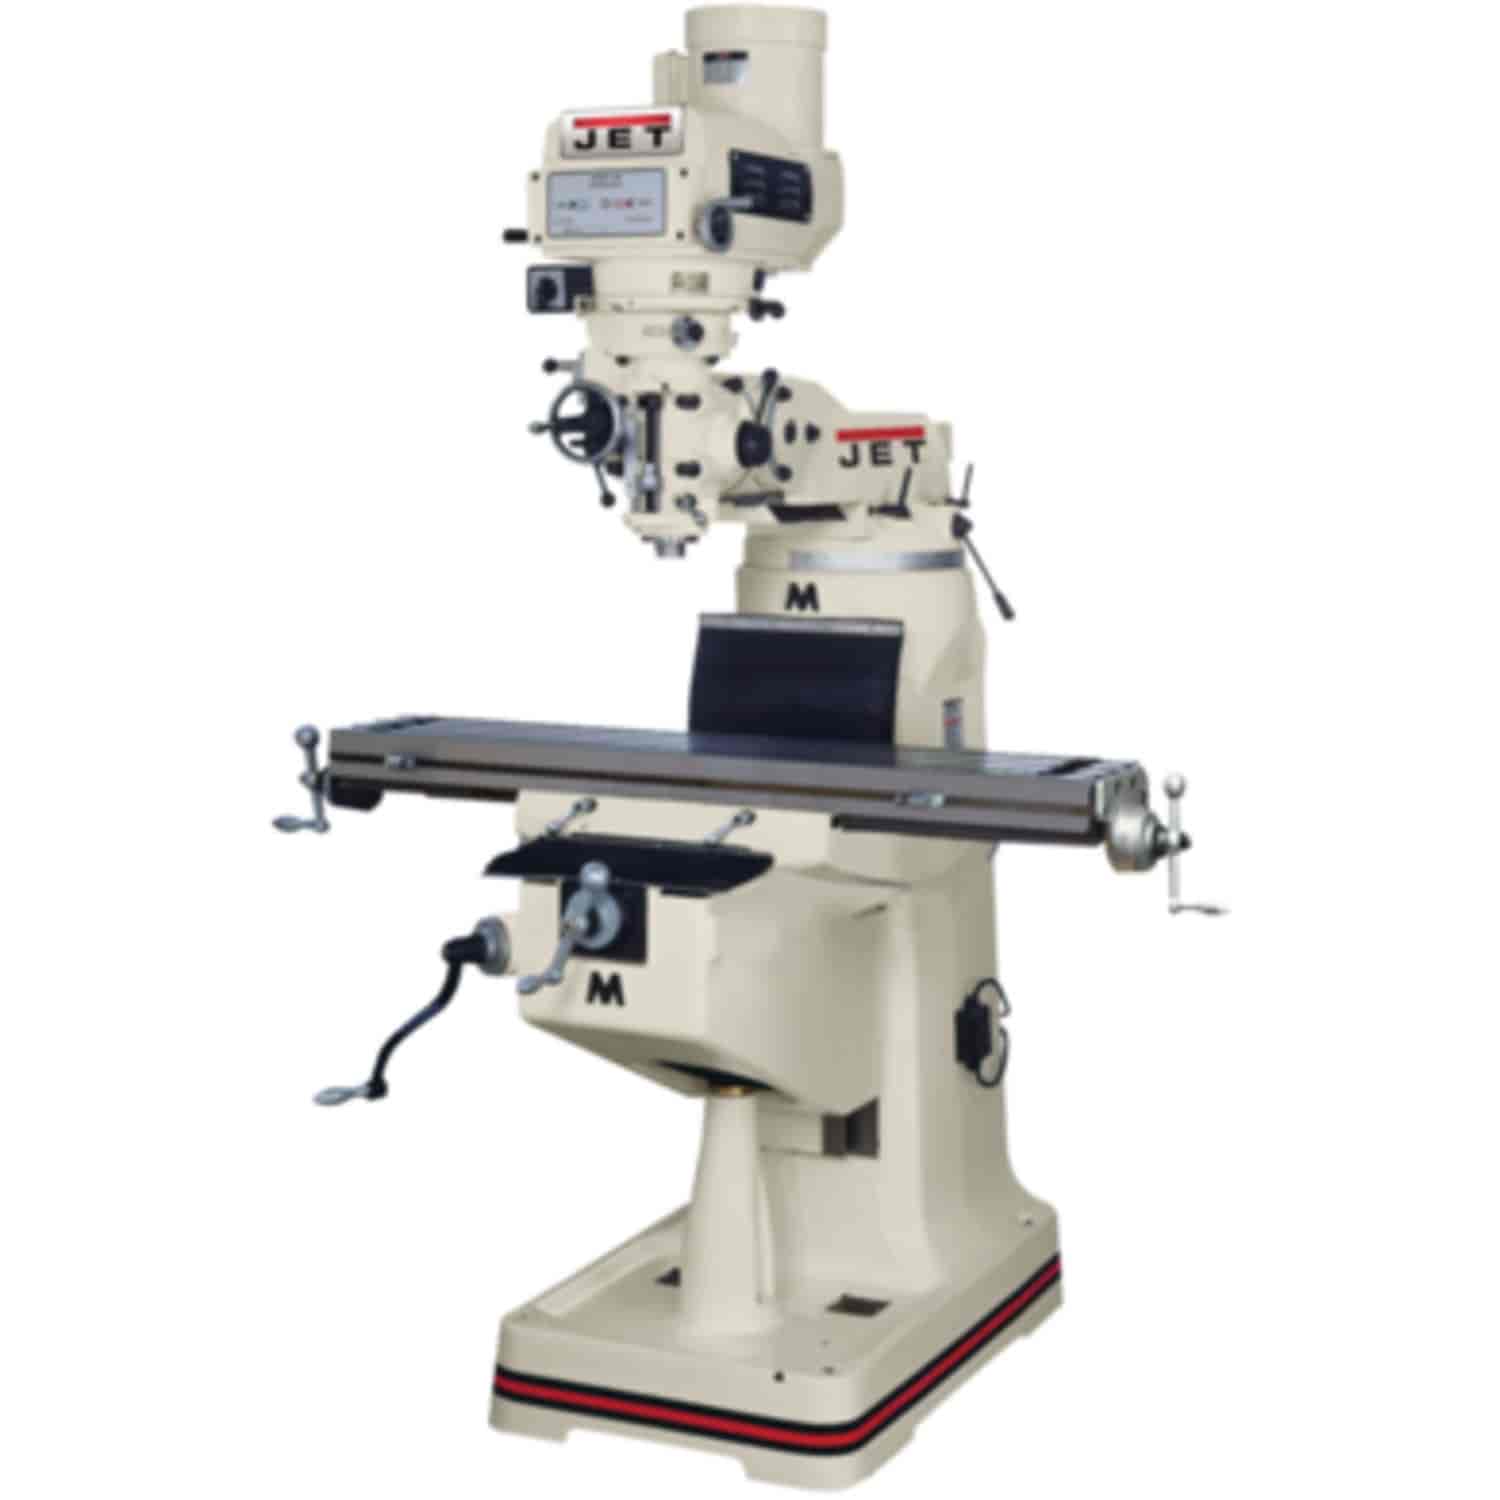 JTM-4VS Mill With 3-Axis Newall DP700 DRO Knee With X Y and Z-Axis Powerfeeds and Power Draw Bar